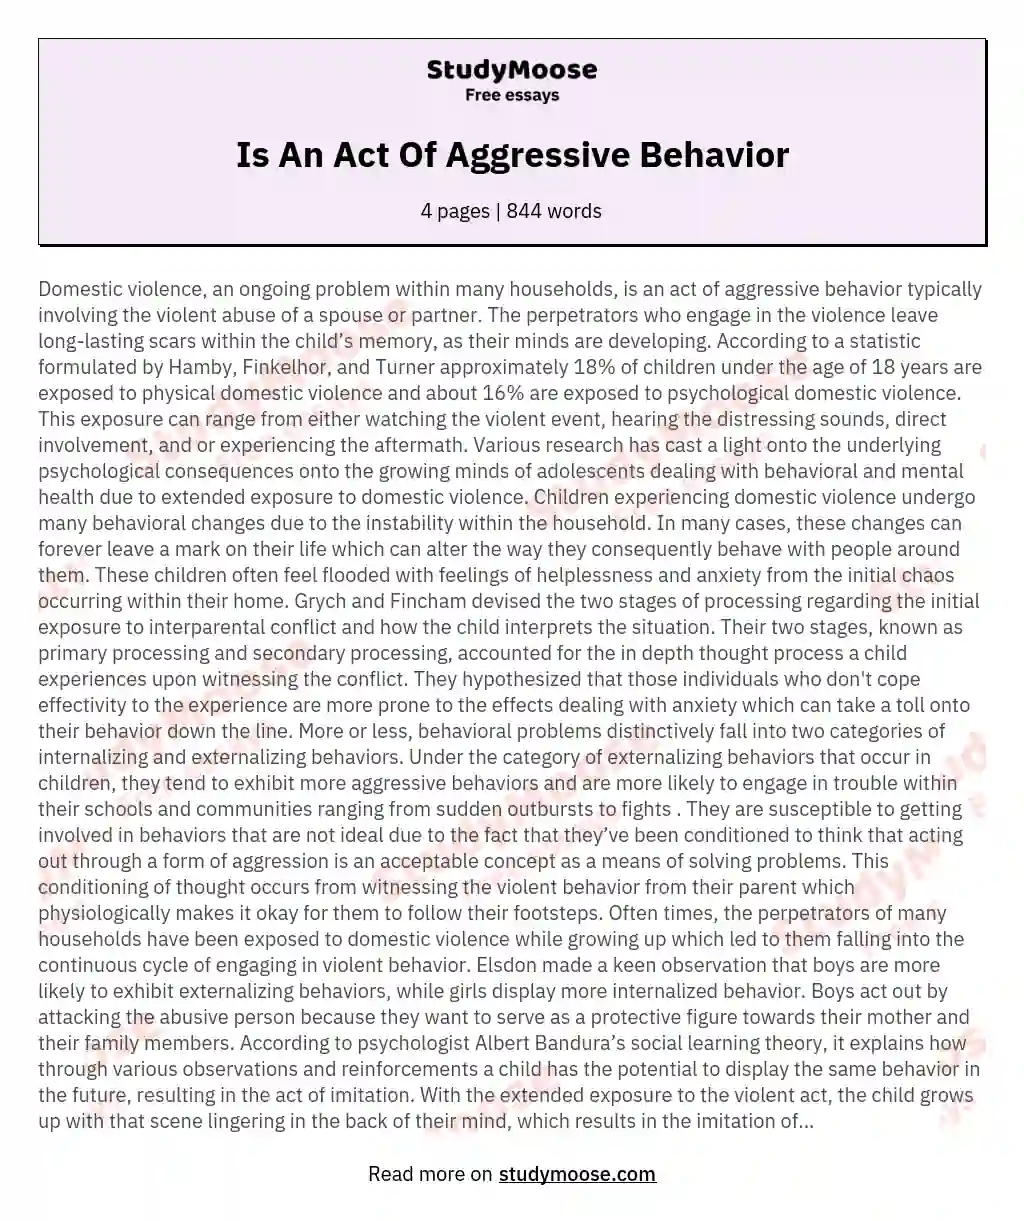 Is An Act Of Aggressive Behavior essay